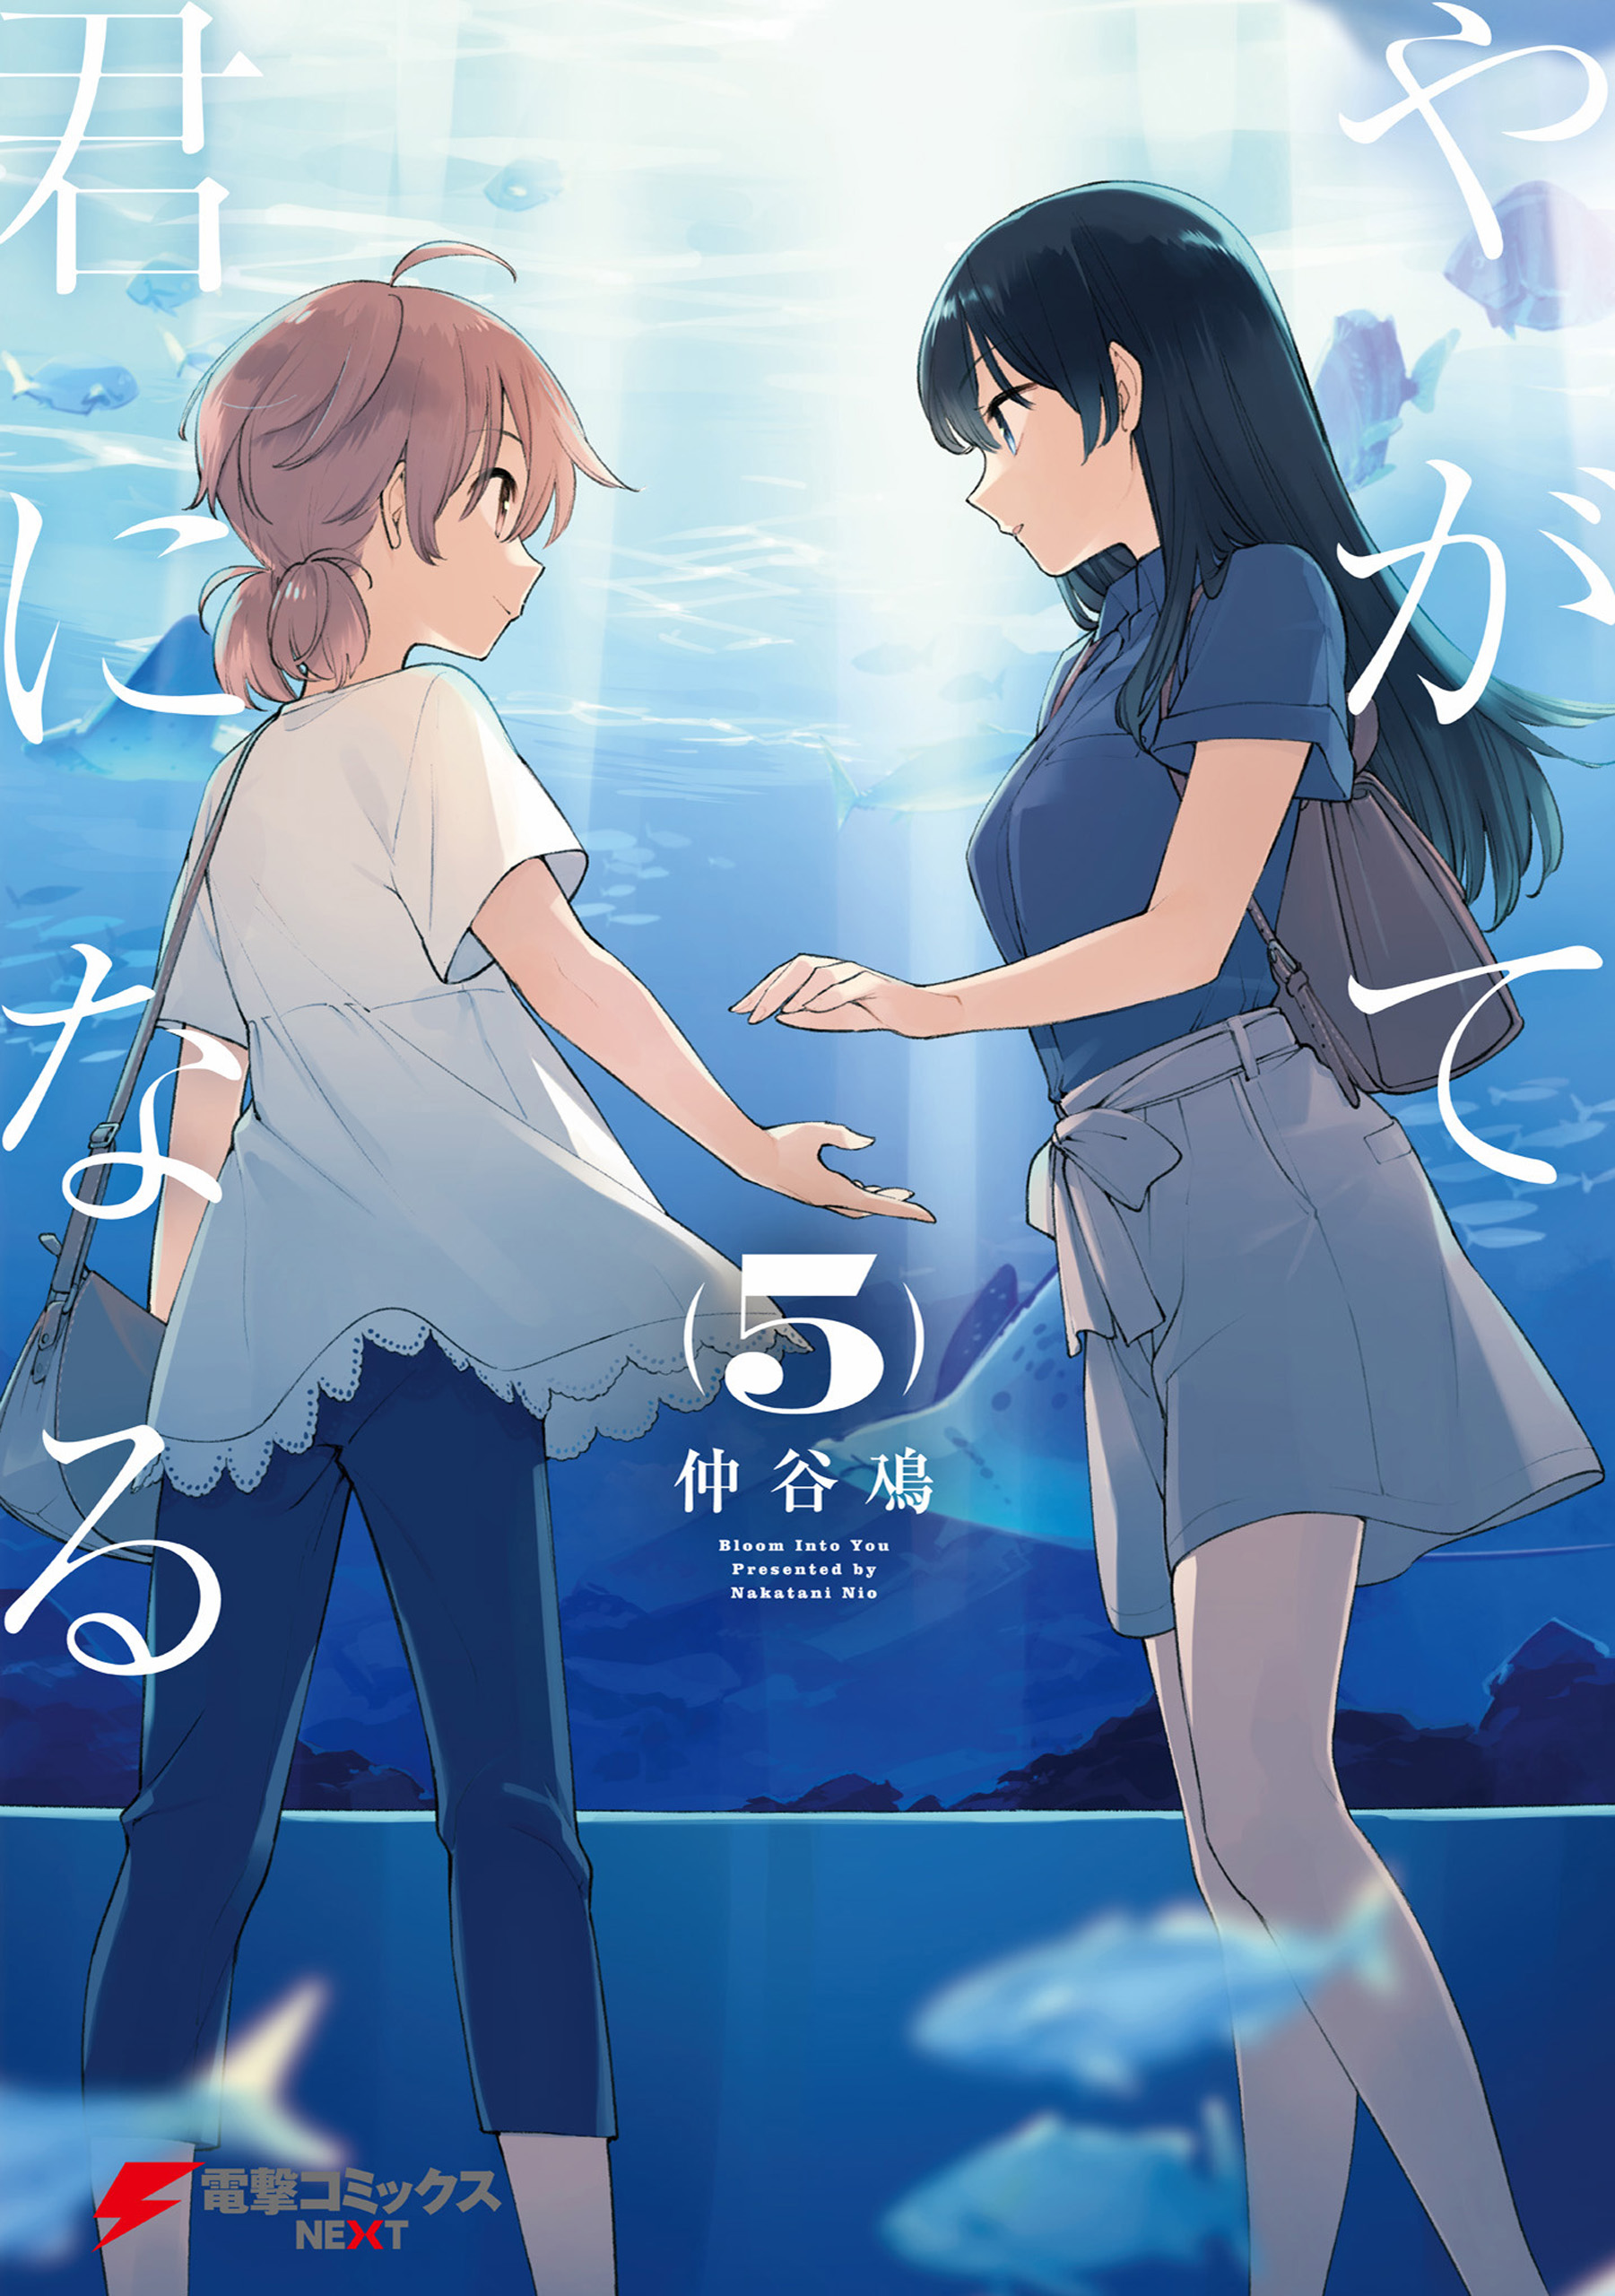 Yuu & Nanami - YagaKimi/Bloom into You Magnet for Sale by Air